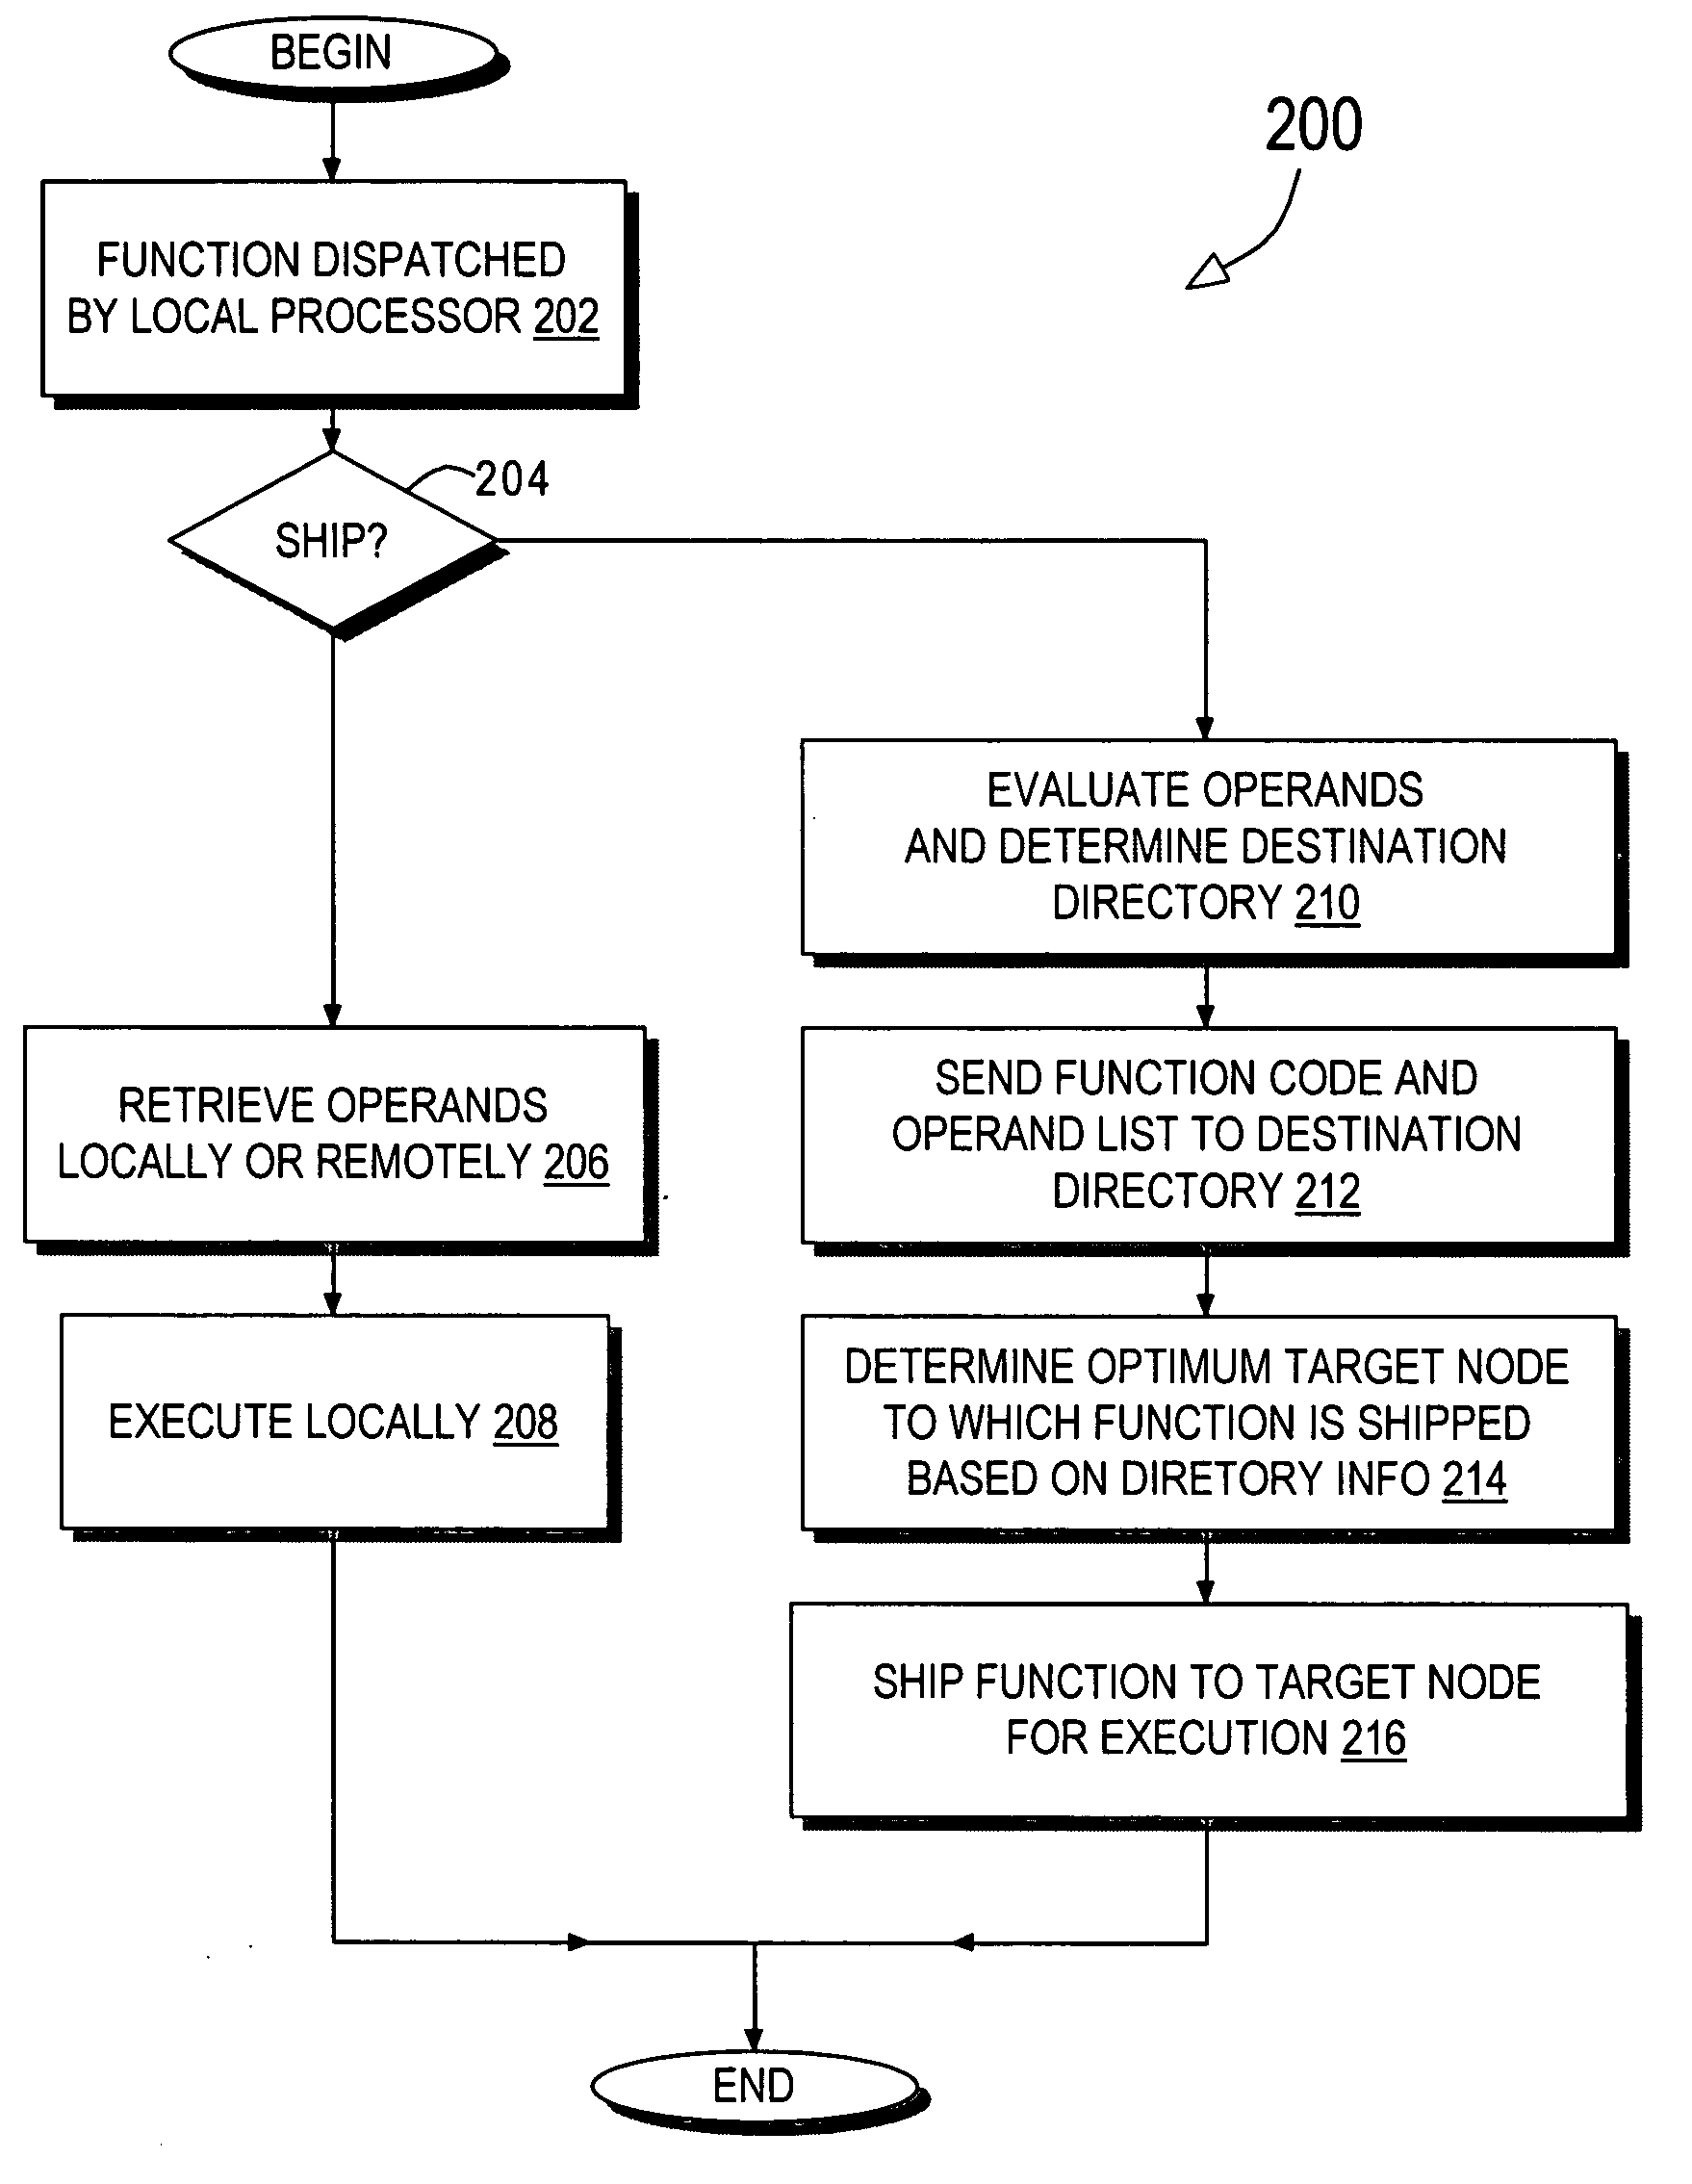 Directory based support for function shipping in a multiprocessor system